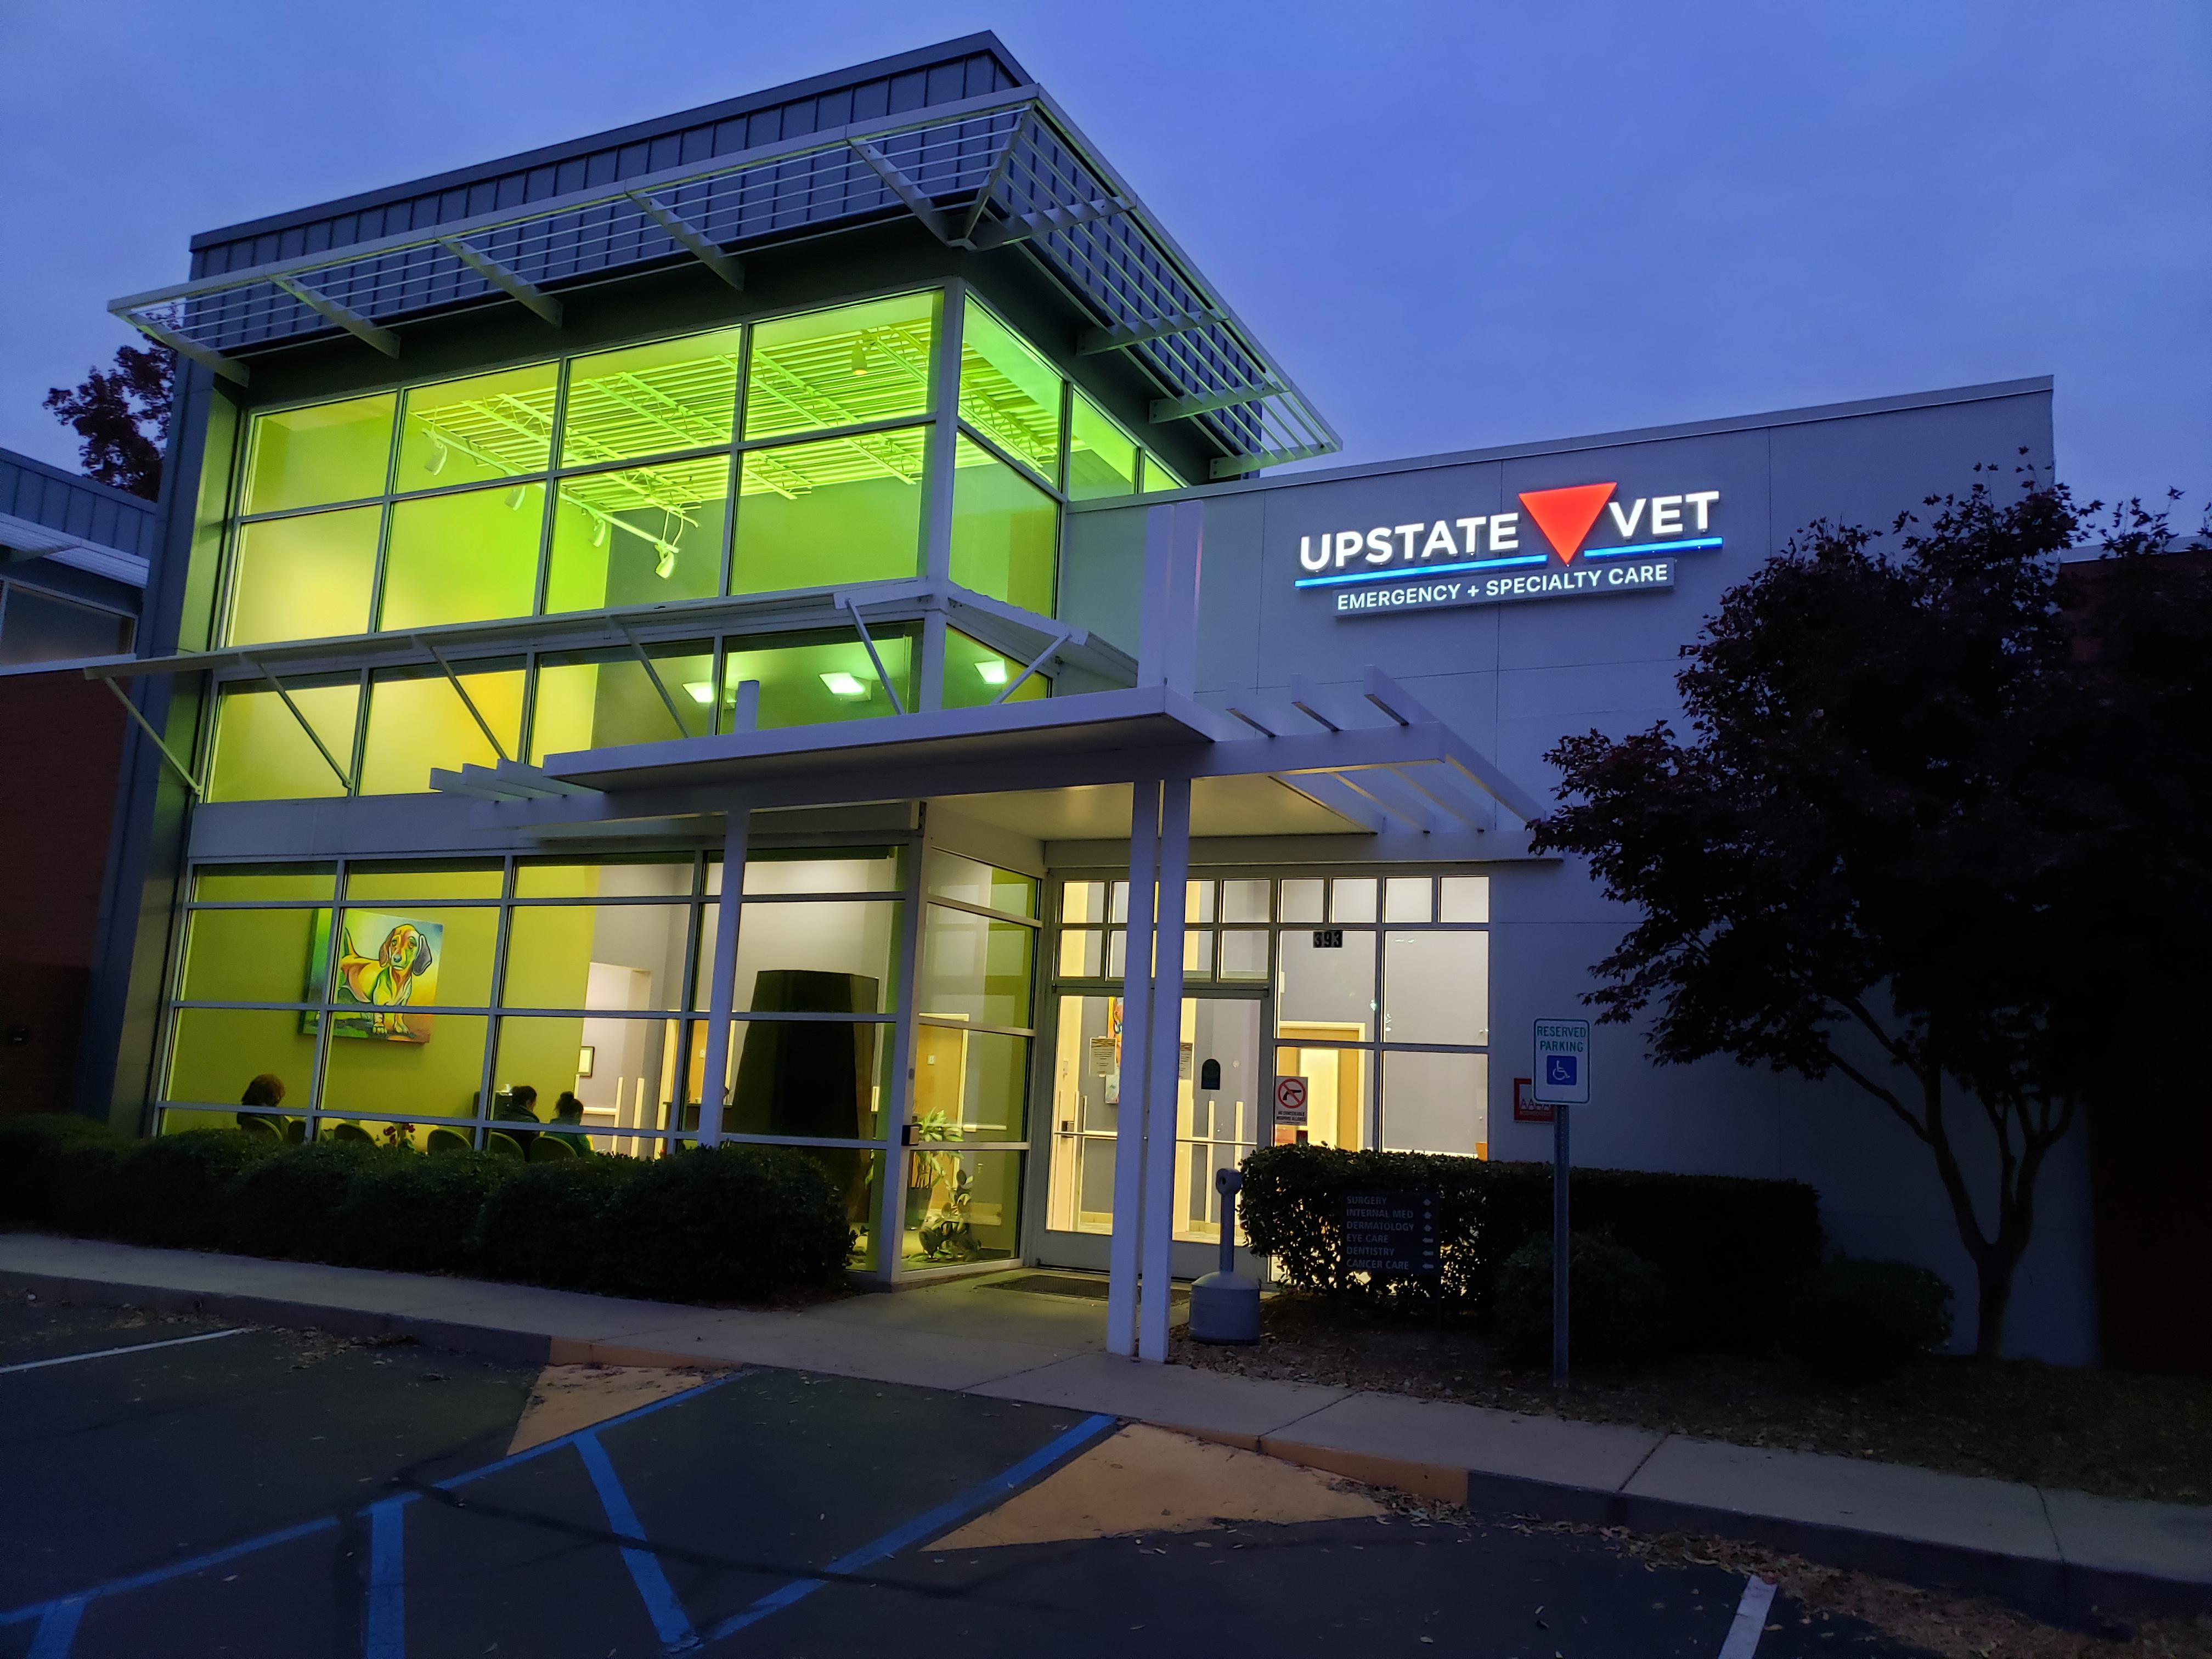 Upstate Vet Emergency + Specialty Care, Greenville Photo